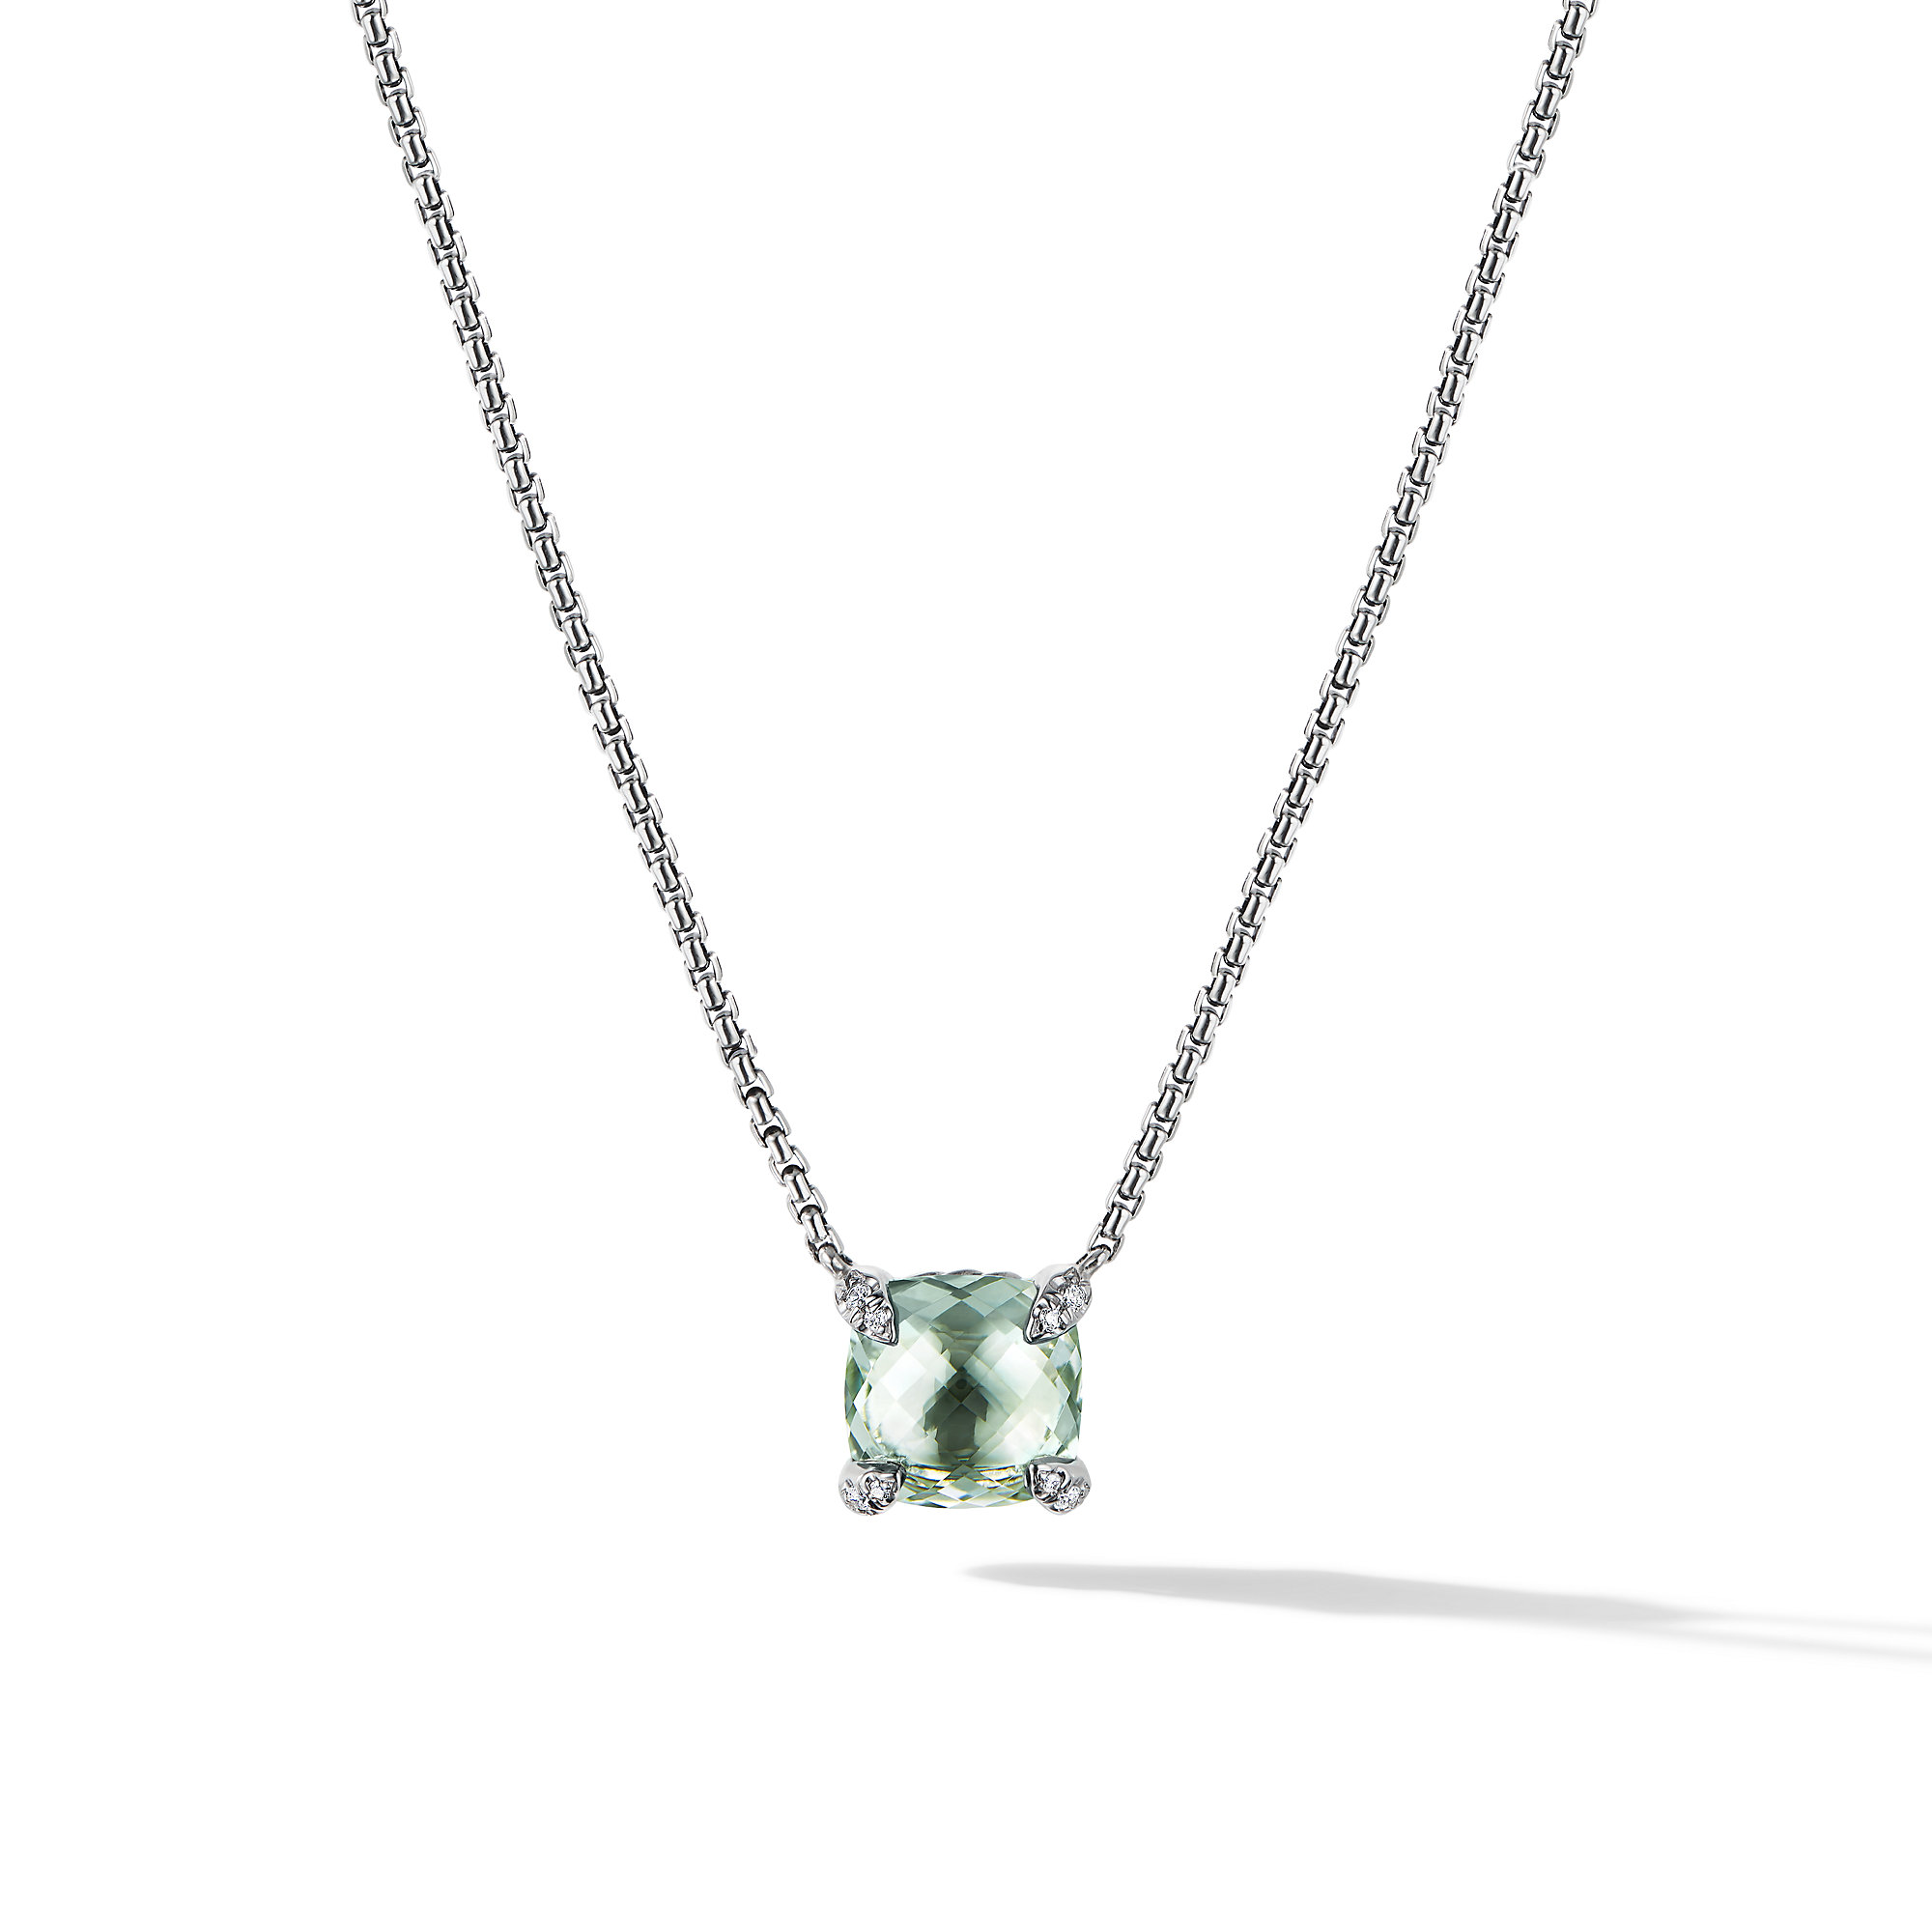 Petite Chatelaine® Pendant Necklace in Sterling Silver with Prasiolite and Pave Diamonds